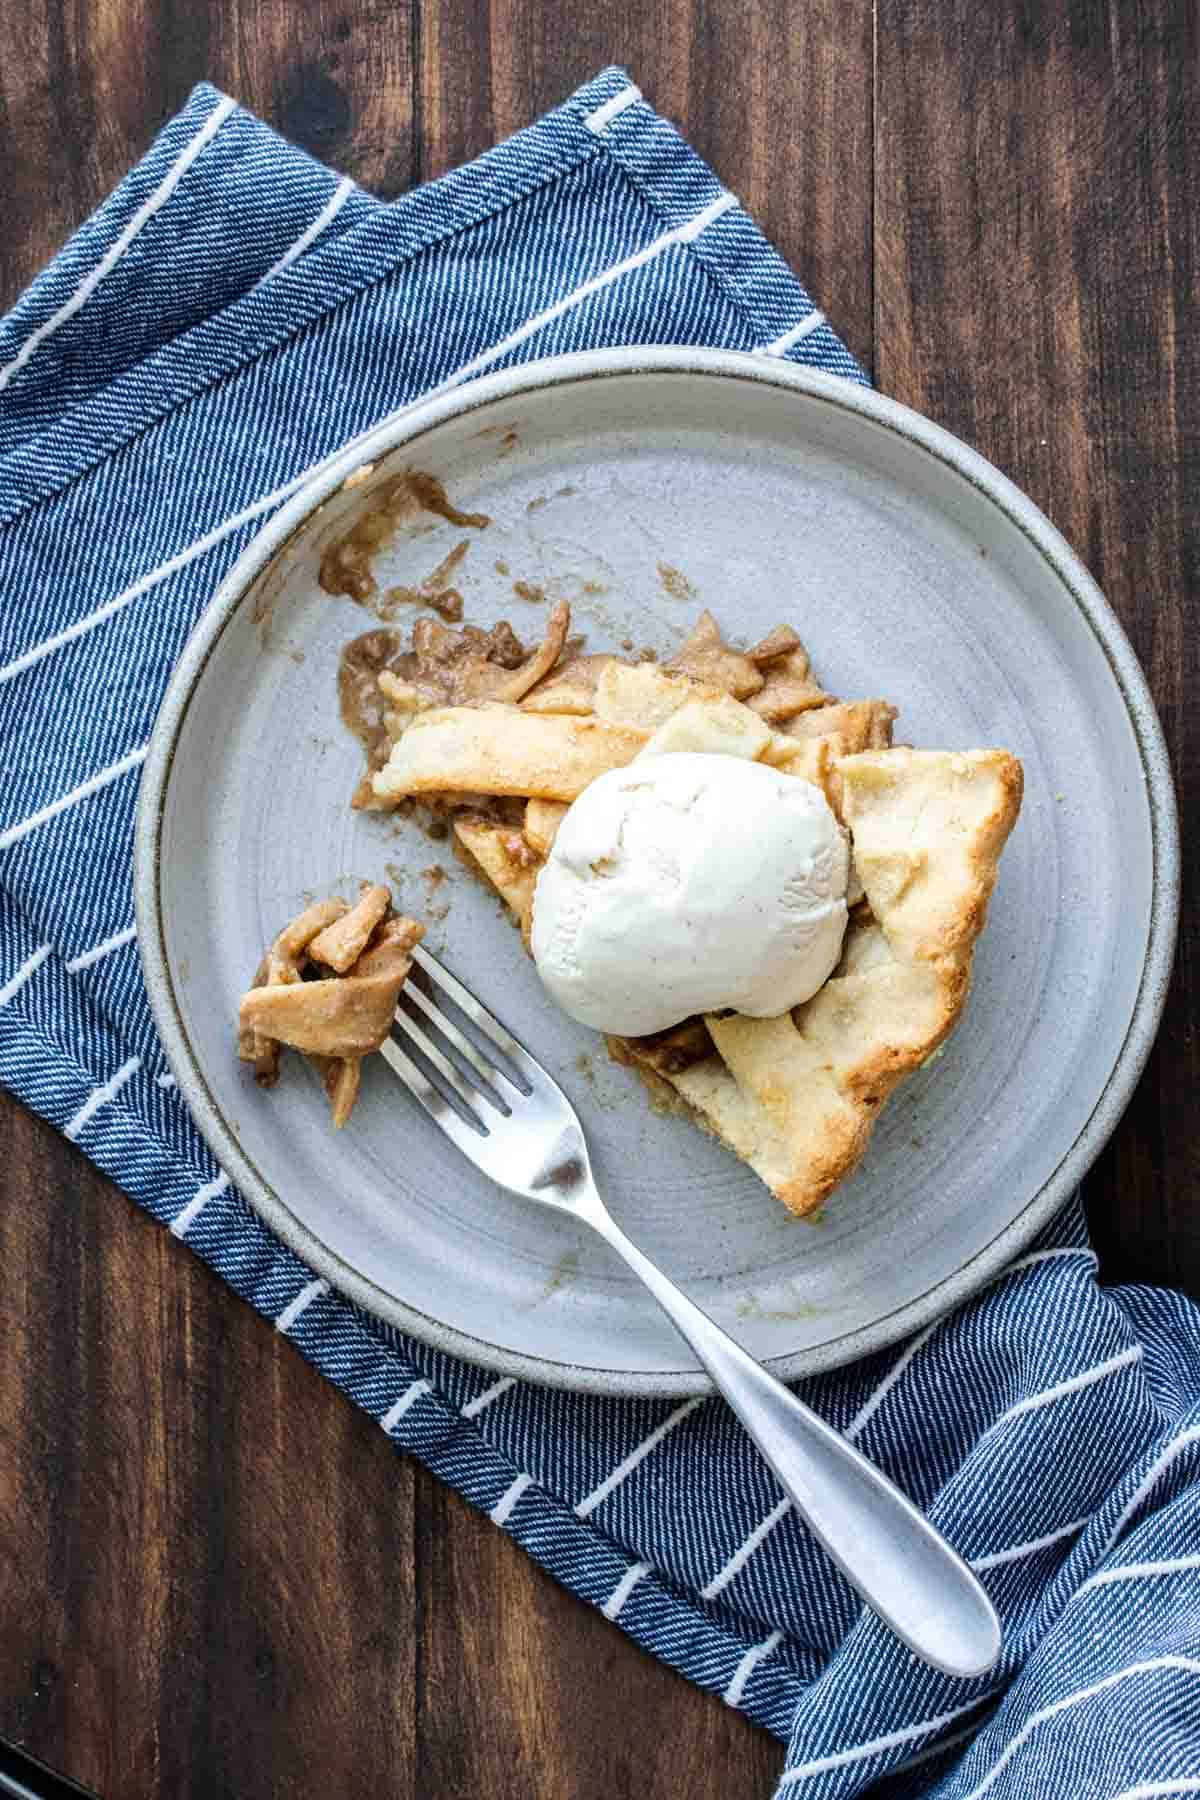 Top view of a fork eating a piece of apple pie topped with ice cream.